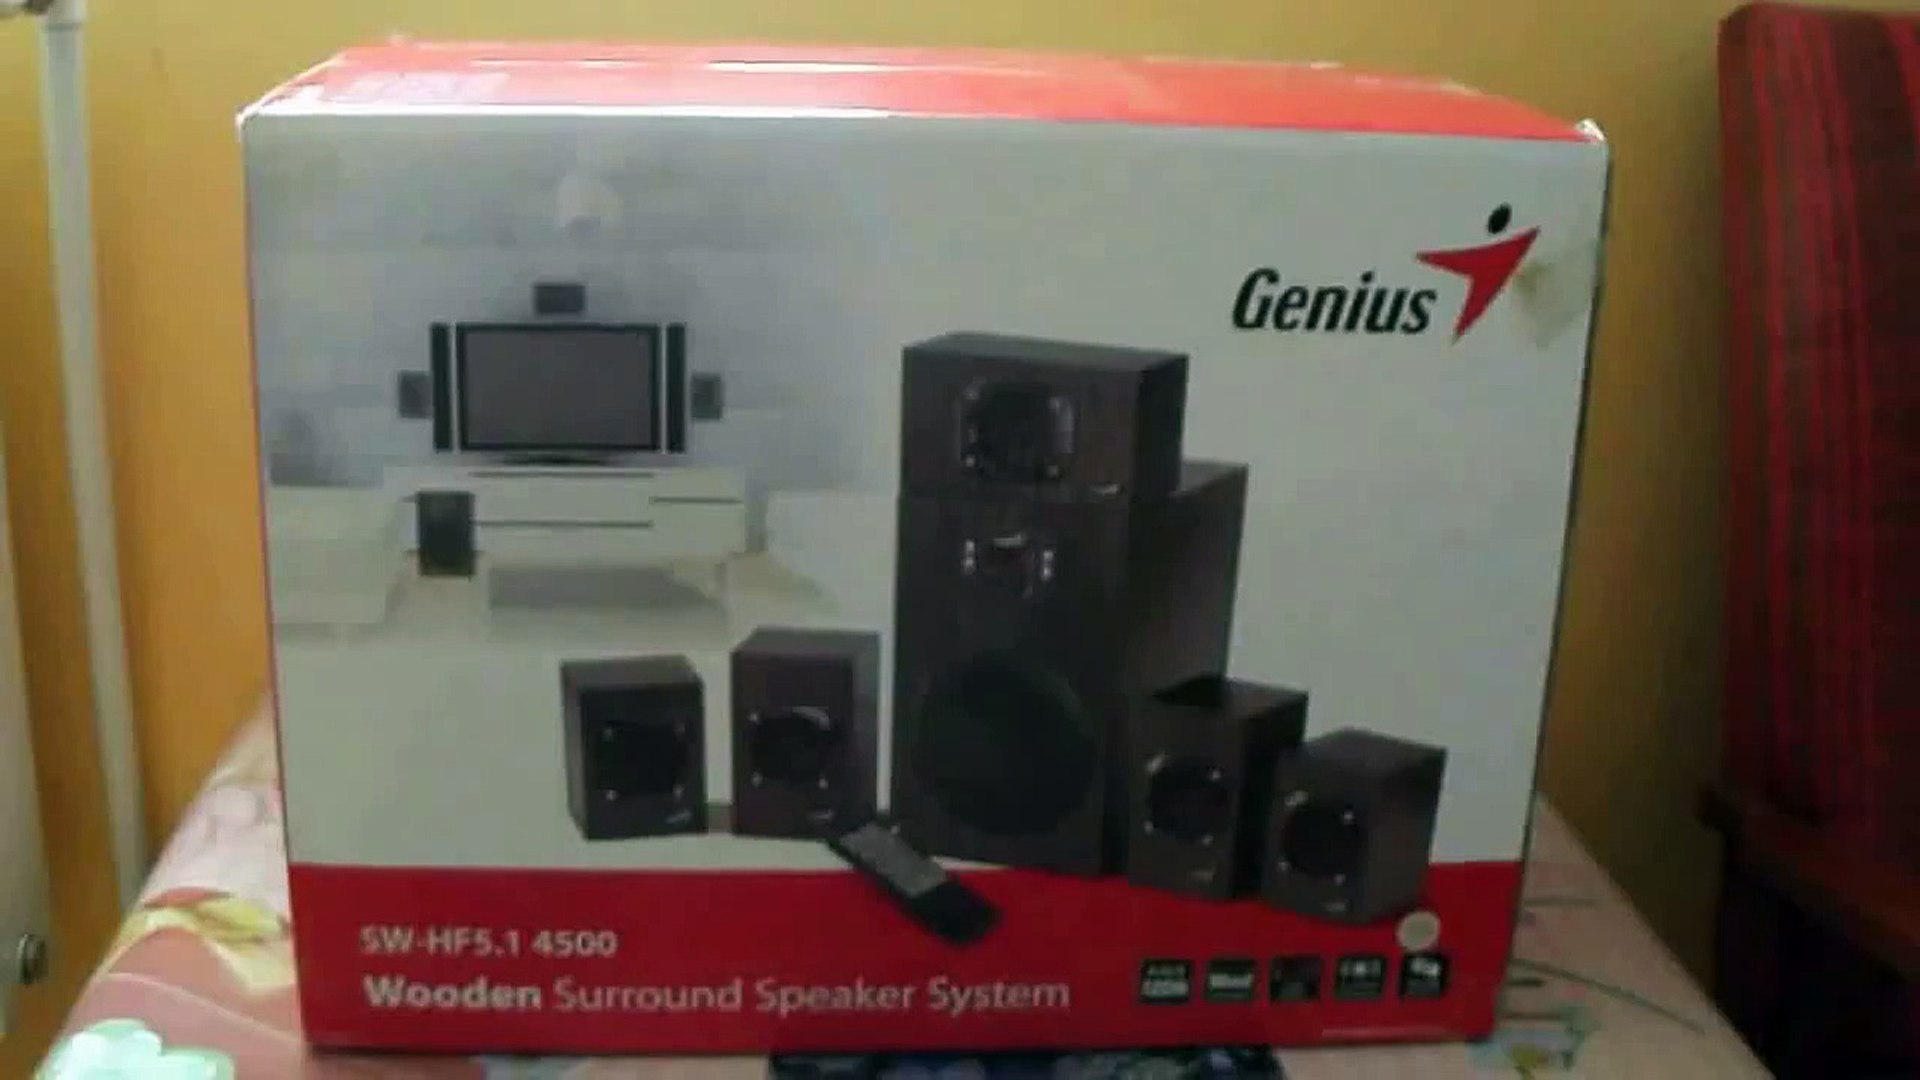 Unboxing Boxe Genius SW-HF5.1 4500 - video Dailymotion